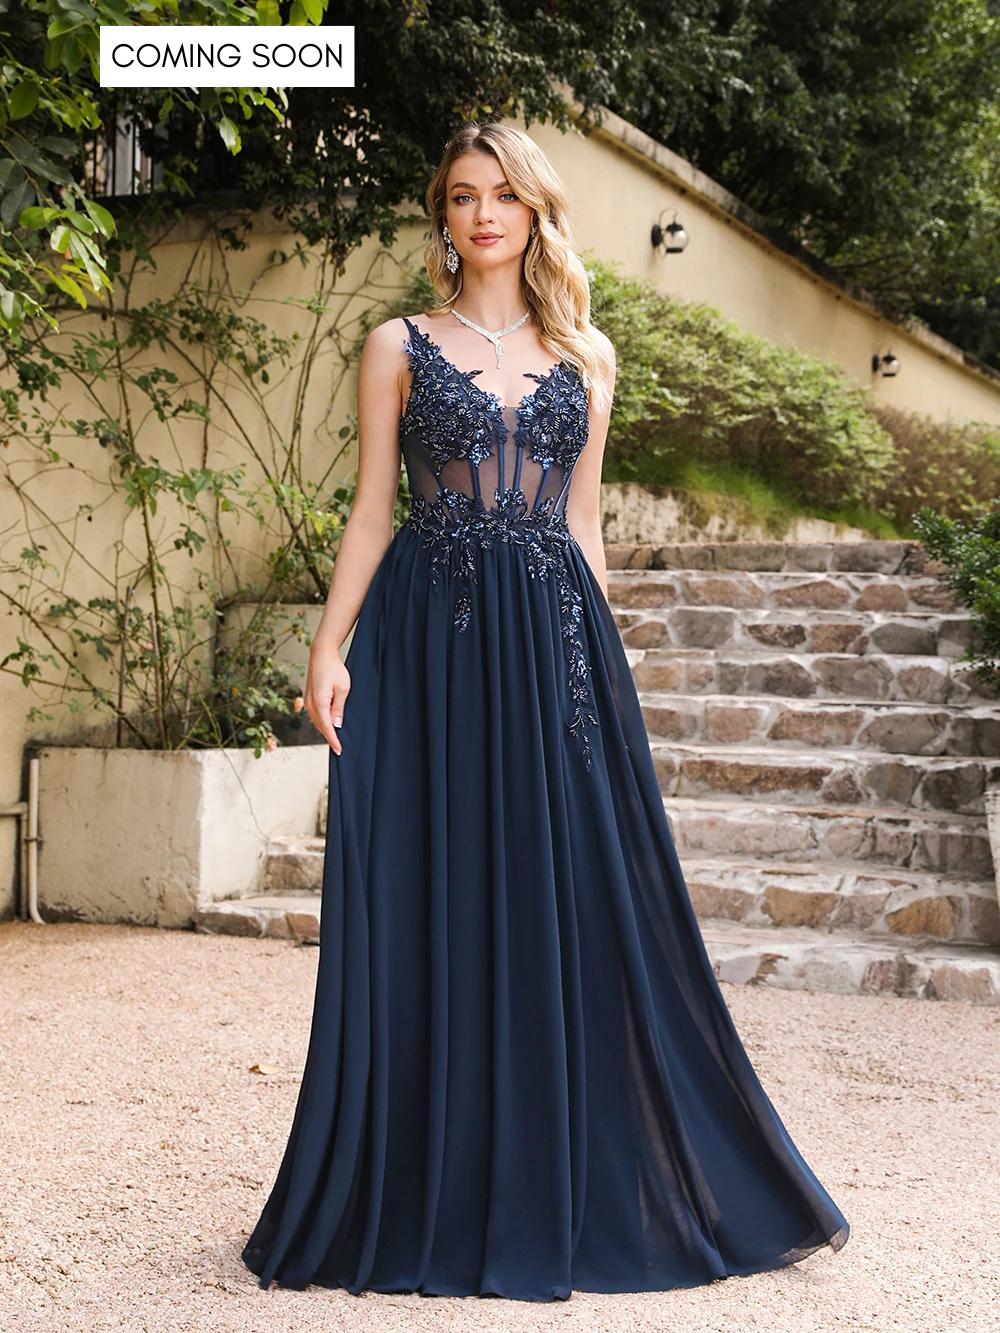 Tulle A-Line Ball Dress in Navy Blue